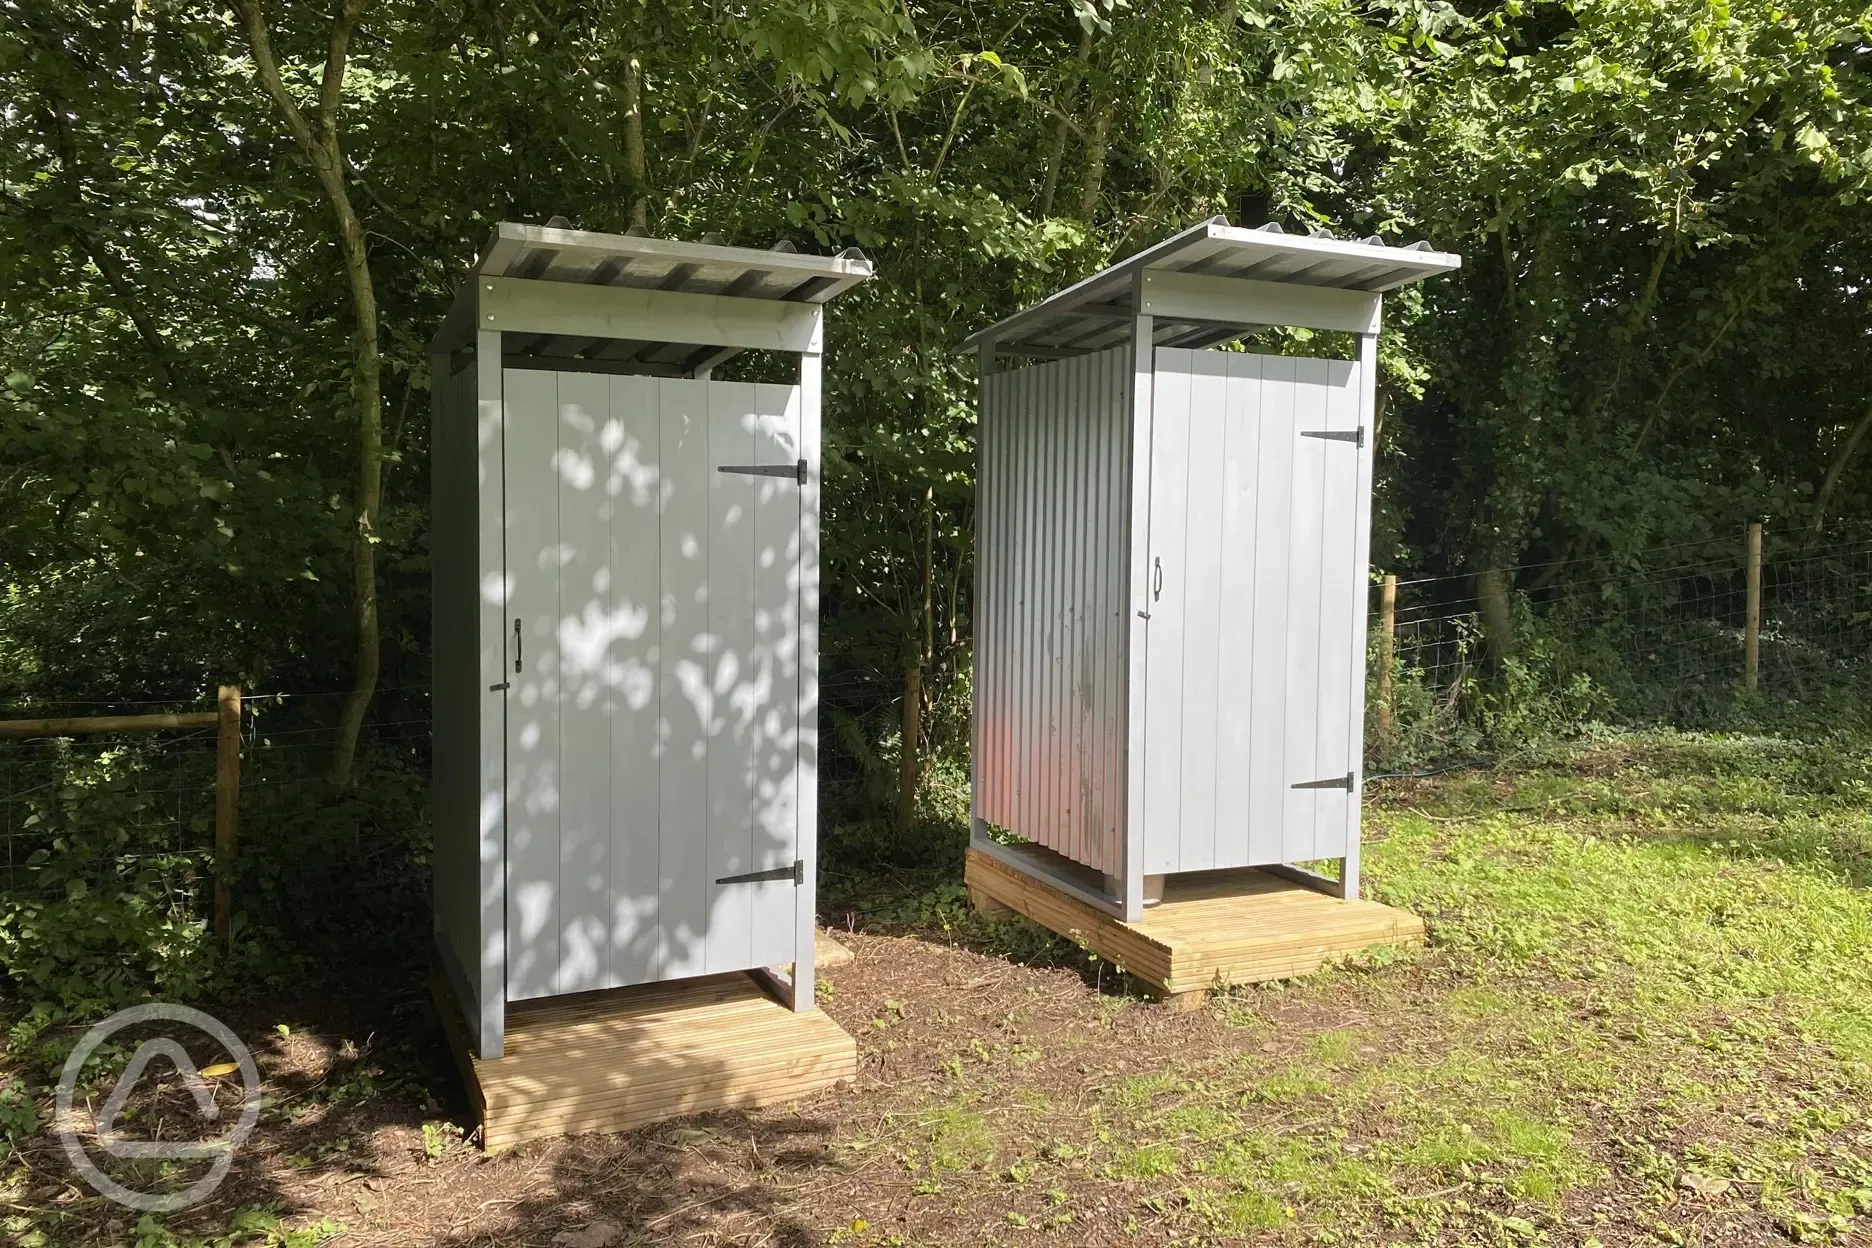 Our toilet and shower huts